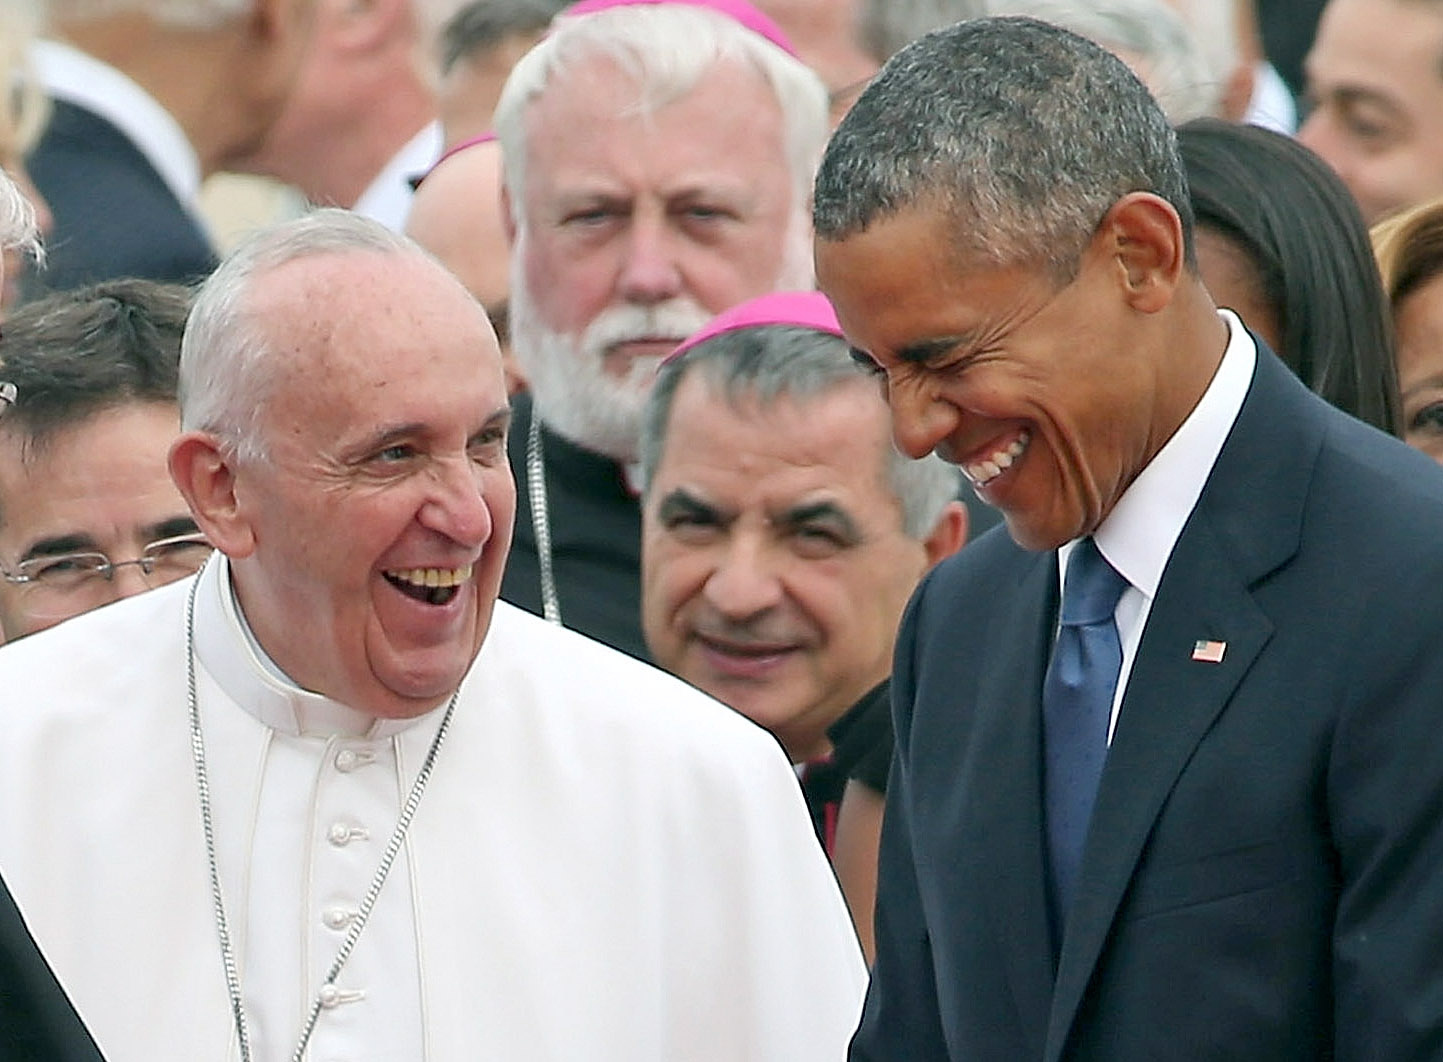 Unifying threads between President Obama and Pope CBS News